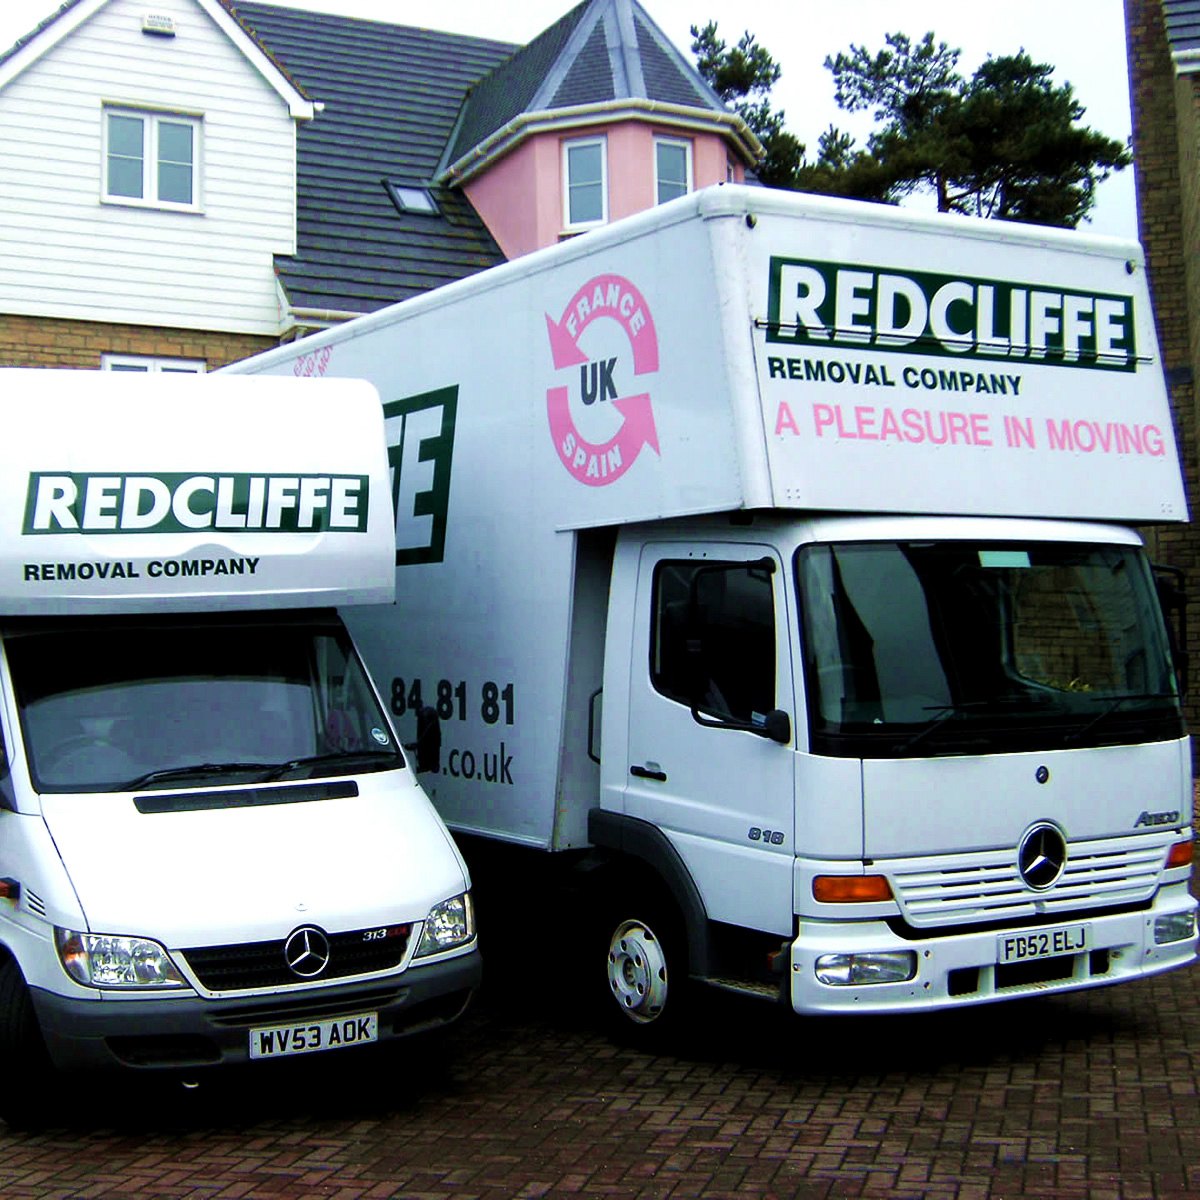 (c) Redclifferemovals.co.uk